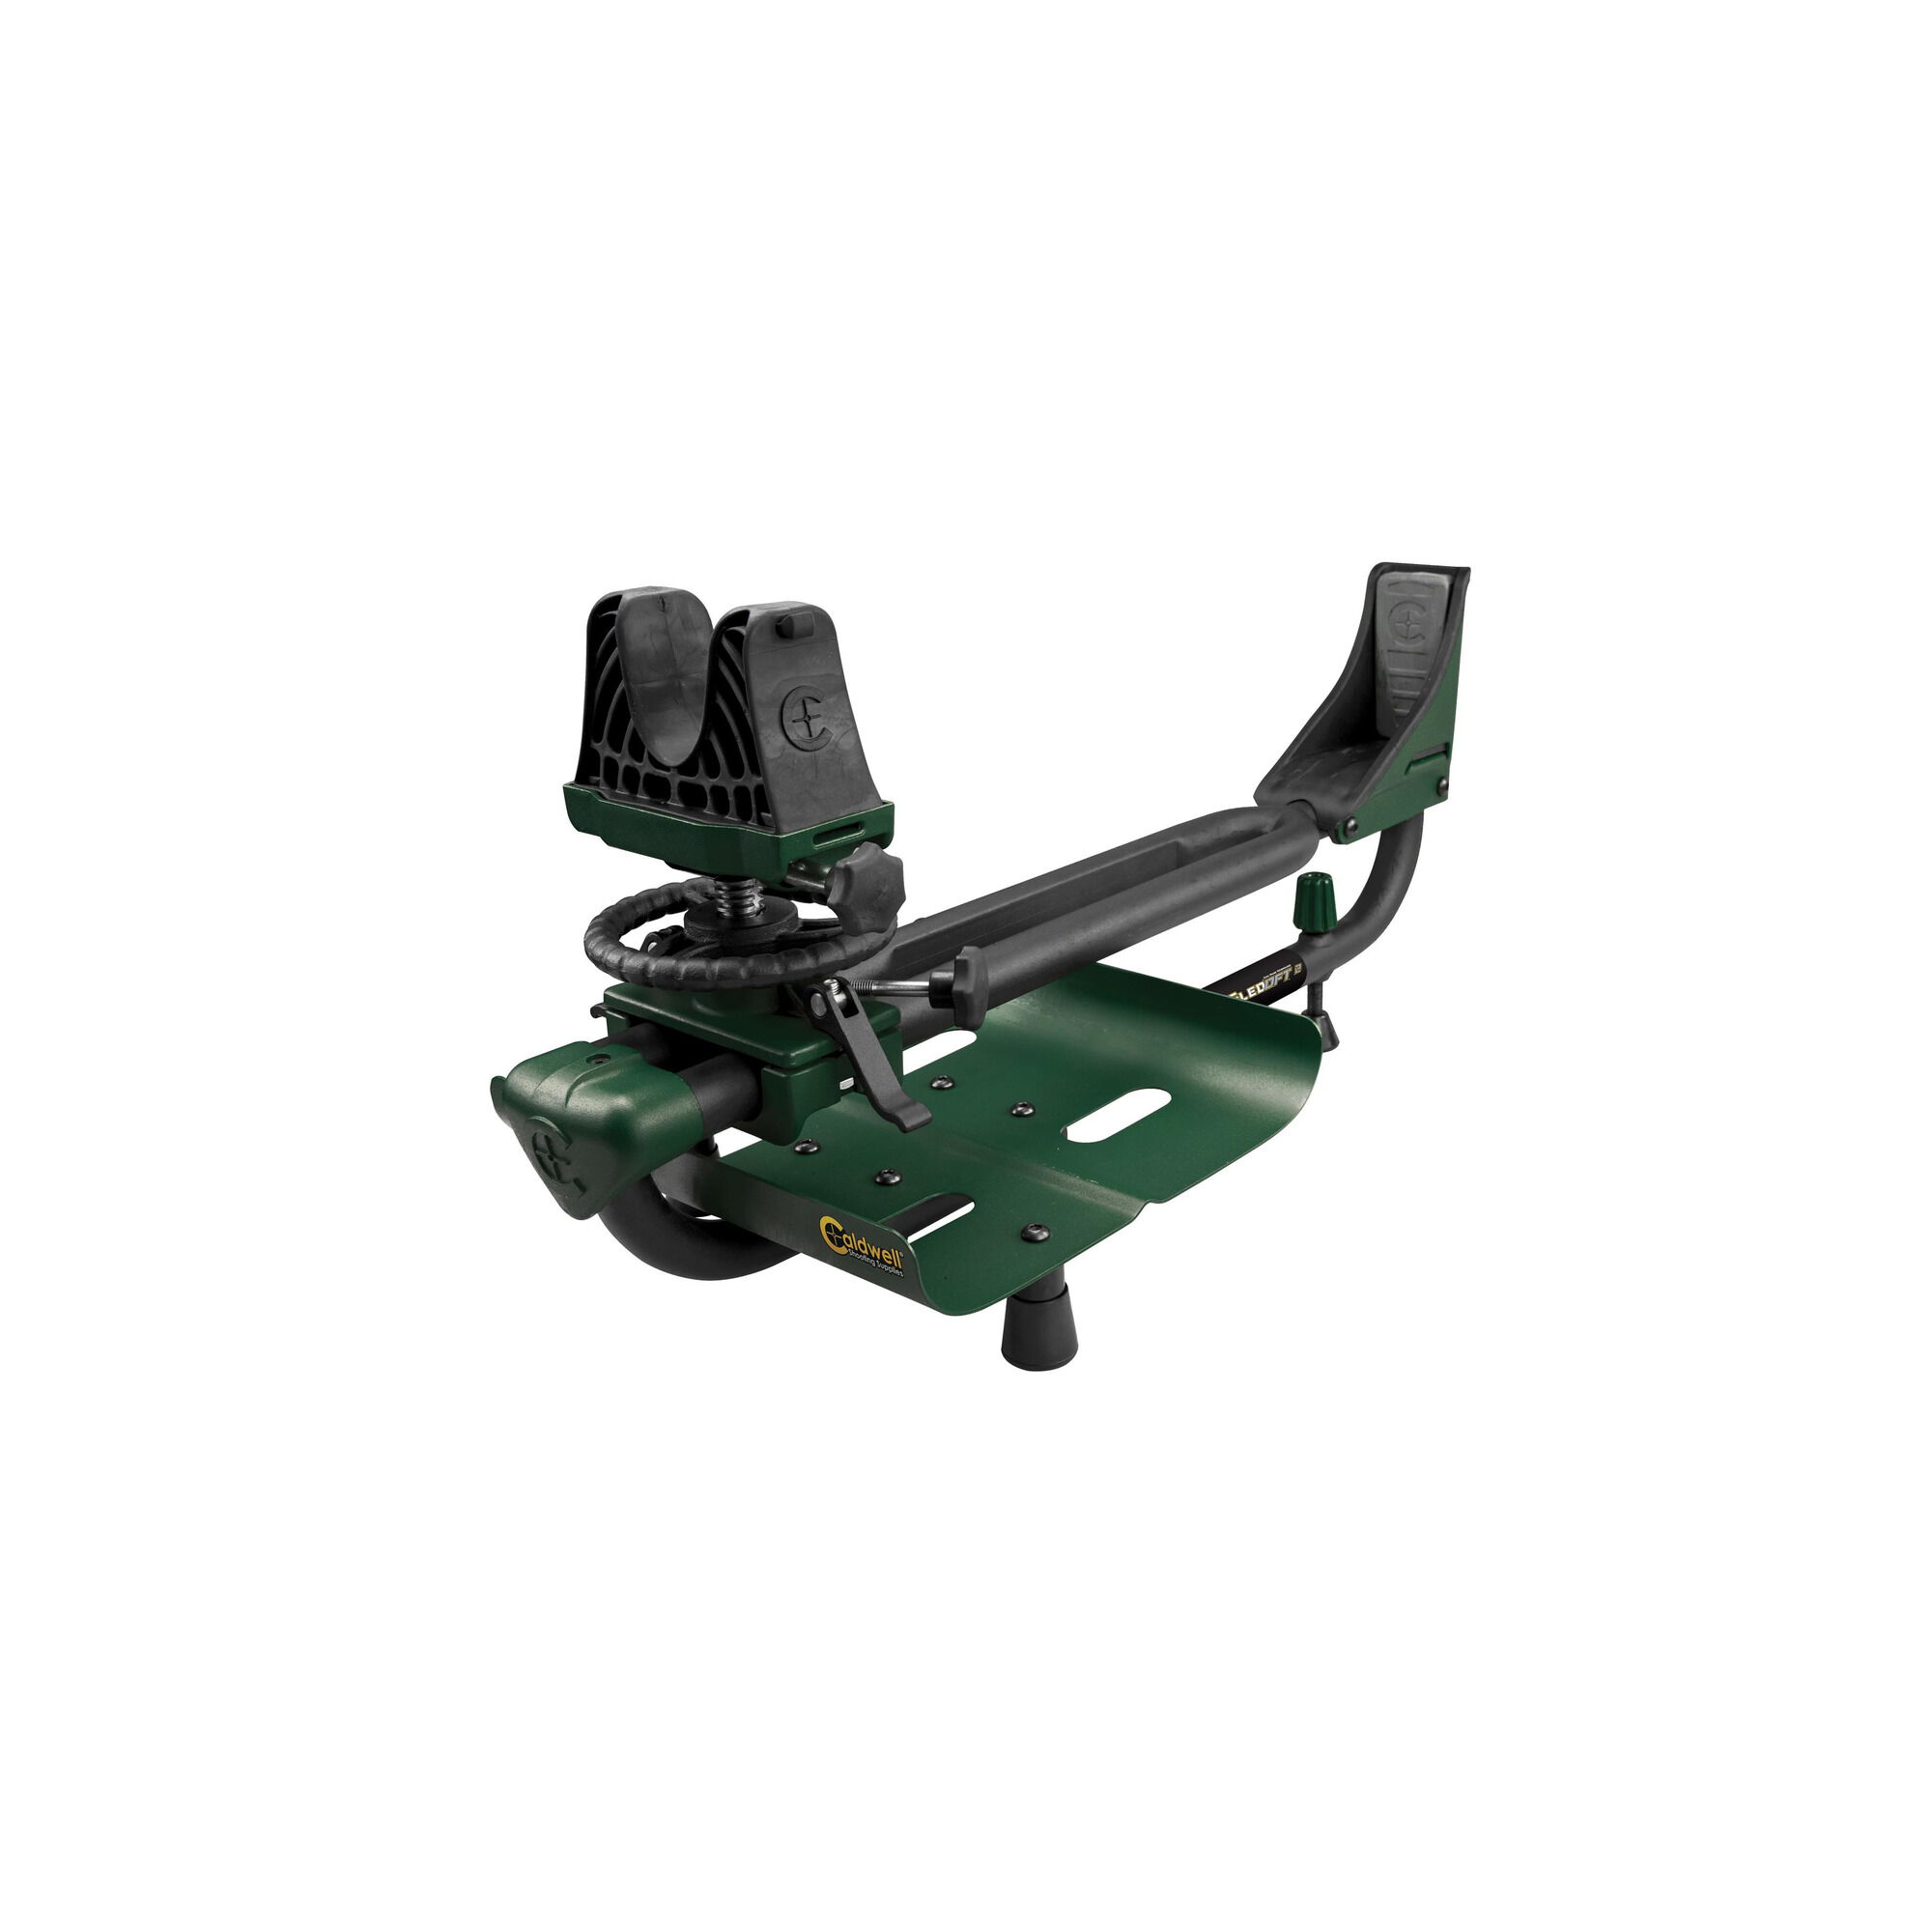 Renewed Caldwell Lead Sled DFT 2 Adjustable Ambidextrous Recoil Reducing Rifle Shooting Rest for Outdoor Range